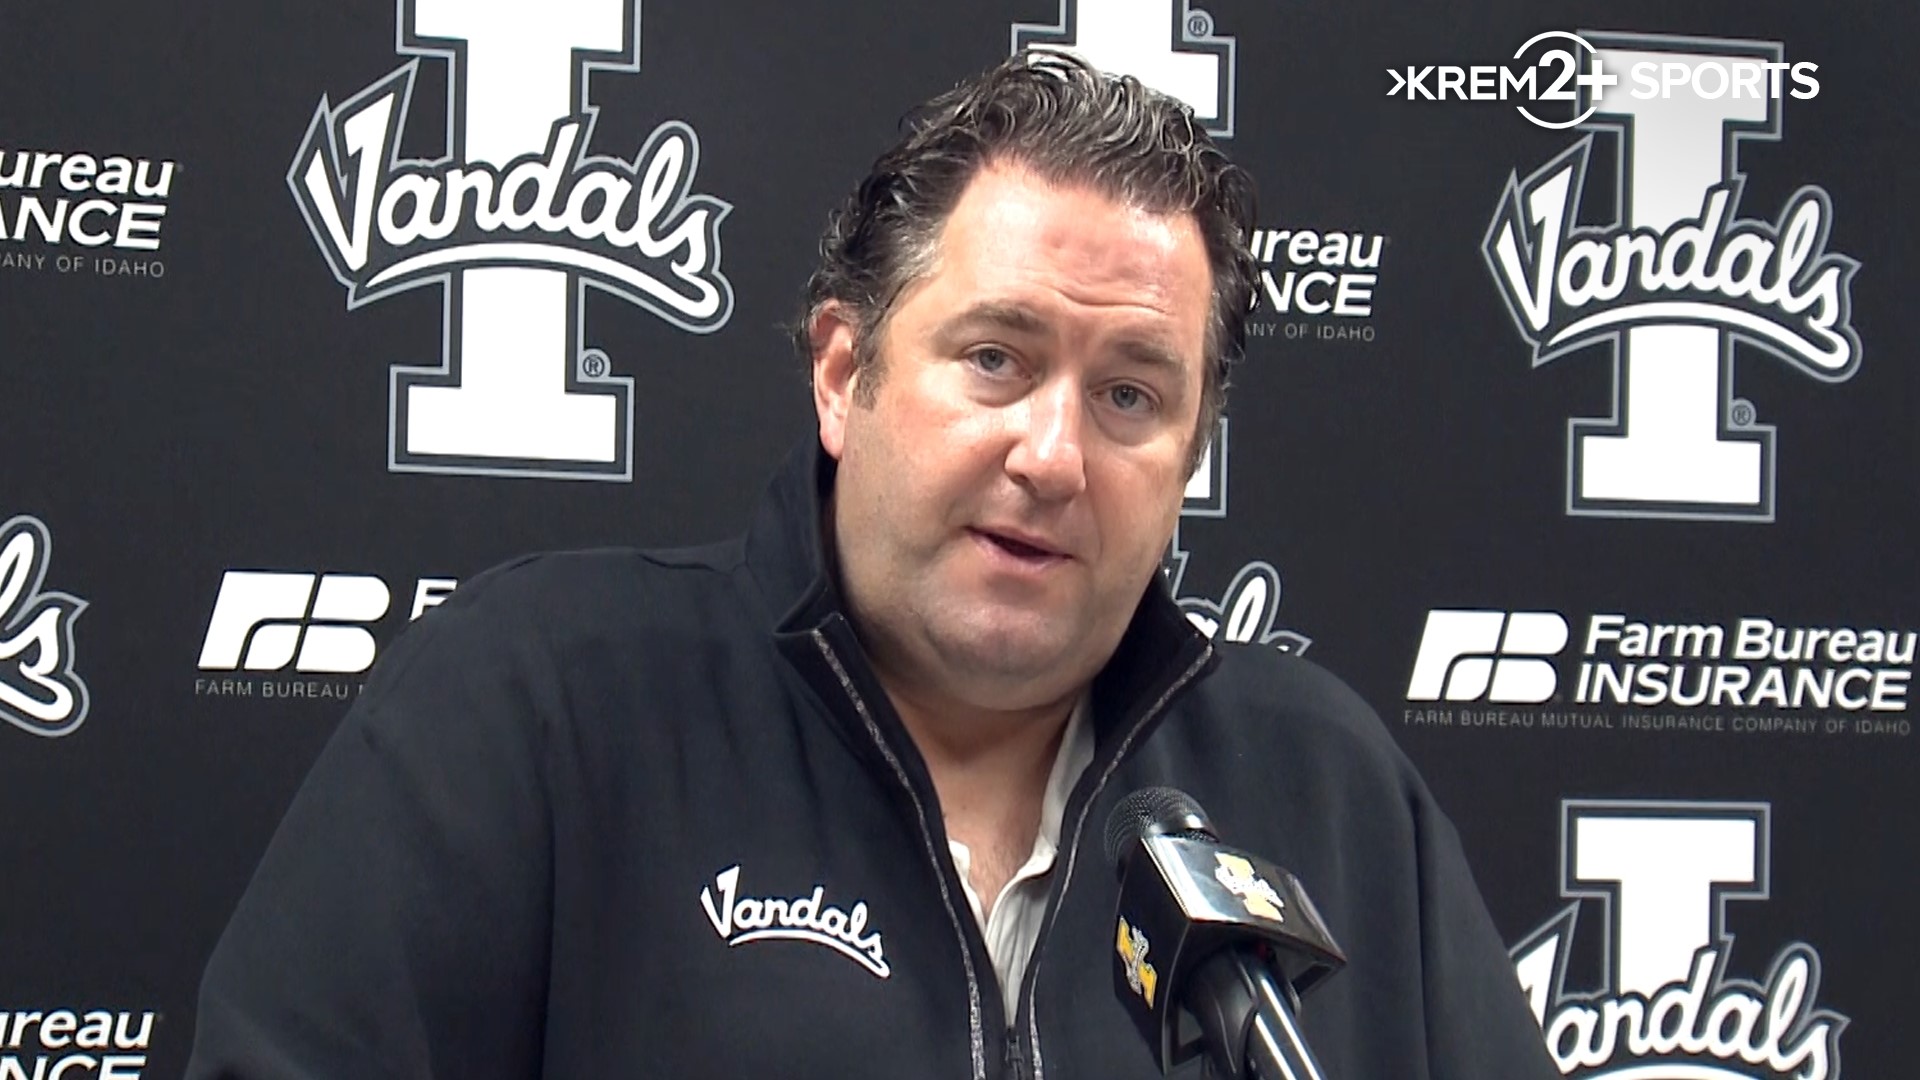 The University of Idaho Vandals football team opens up Big Sky conference play on the road this Saturday against Northern Arizona.